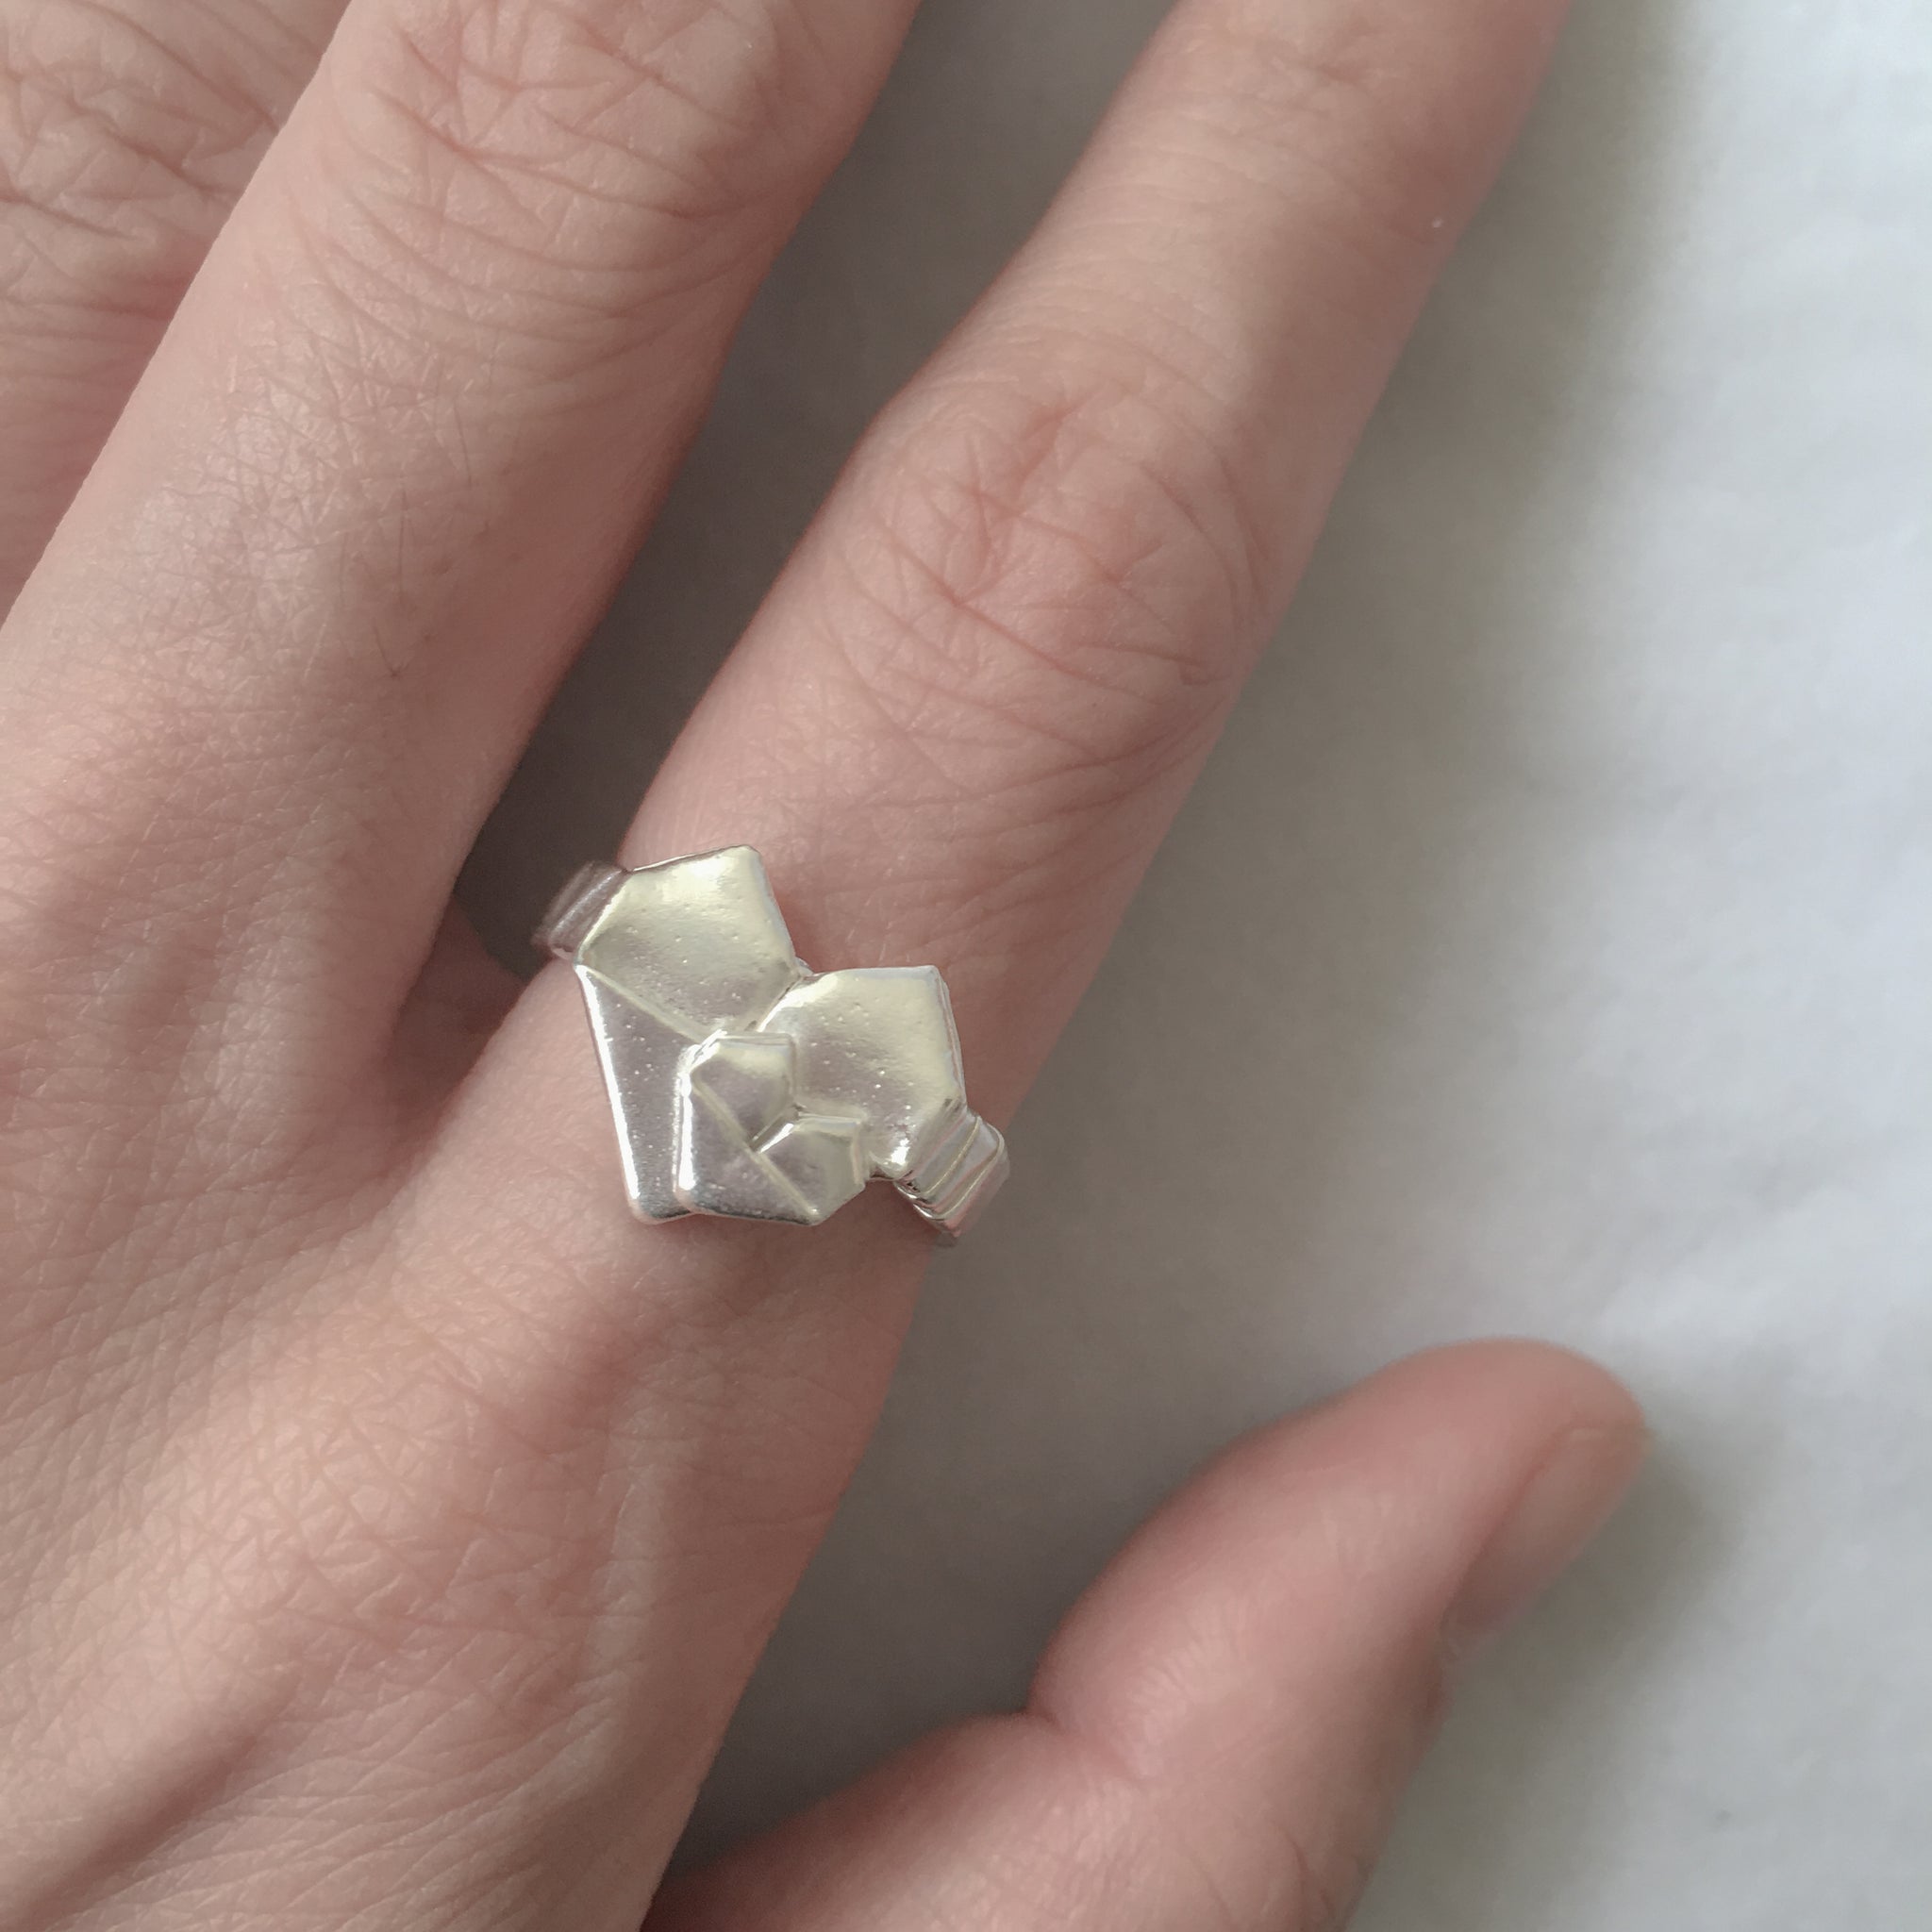 Ring B 925 Silver Origami Big and Small Heart Ring Size 10